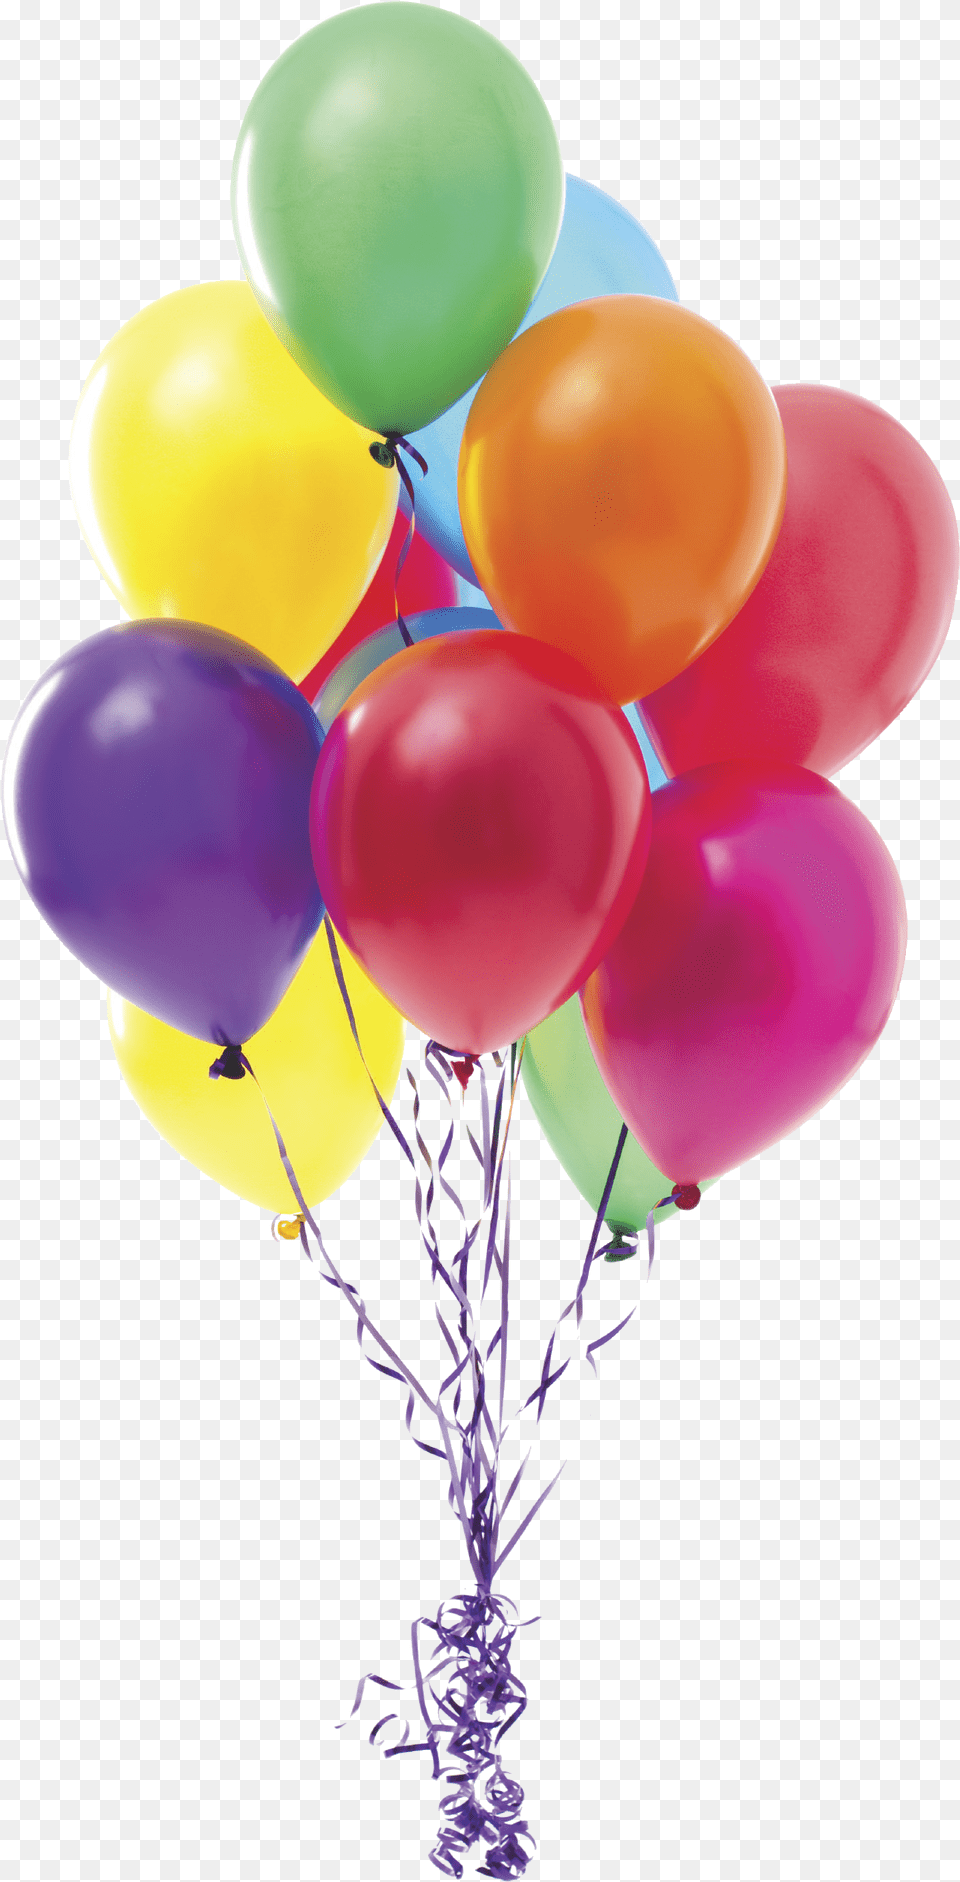 Balloon Clipart Free Balloons Images Download Free Real Birthday Balloons Png Image